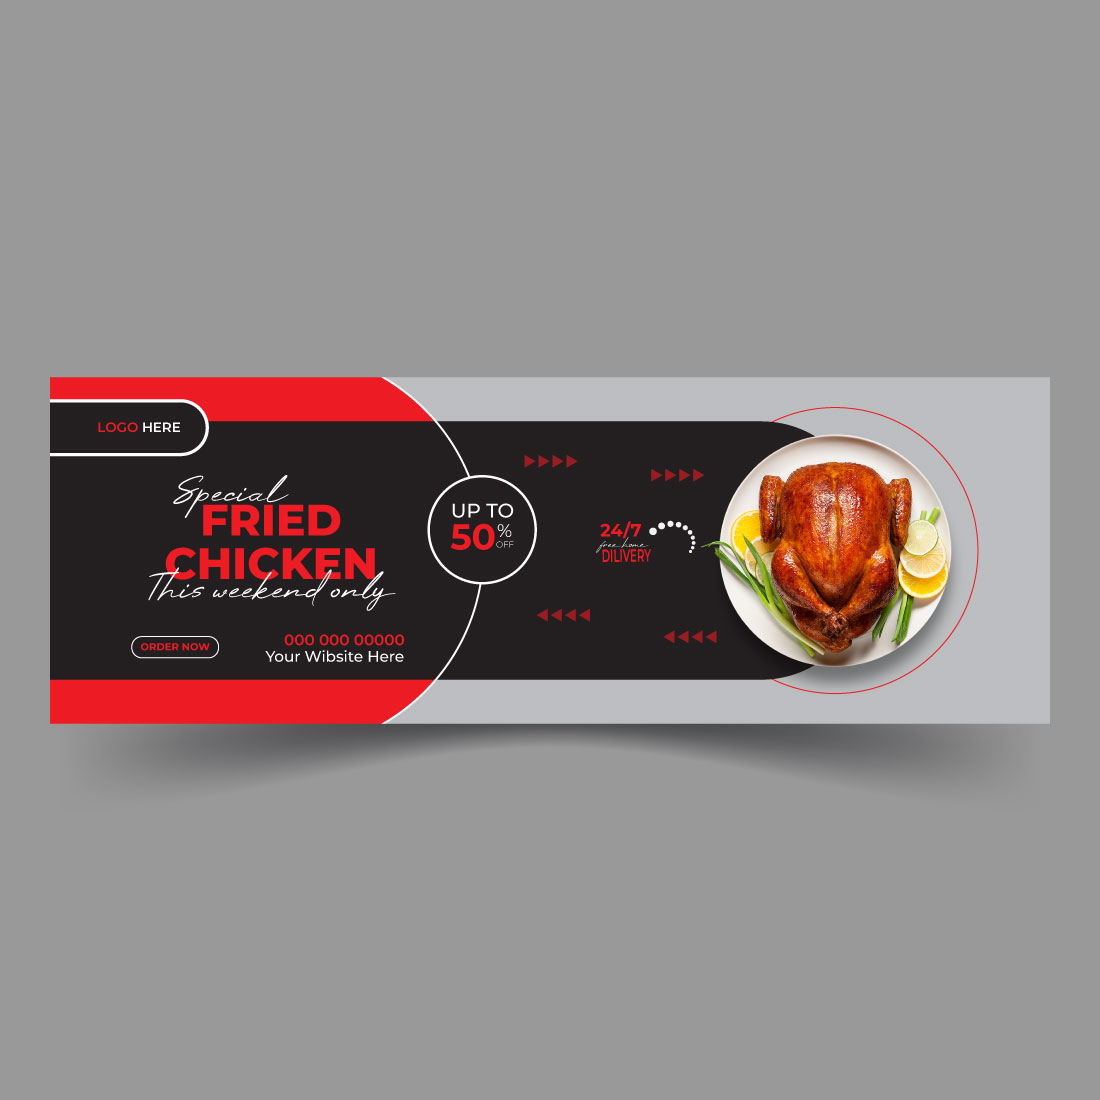 Delicious chicken and food delivery Facebook cover template cover image.